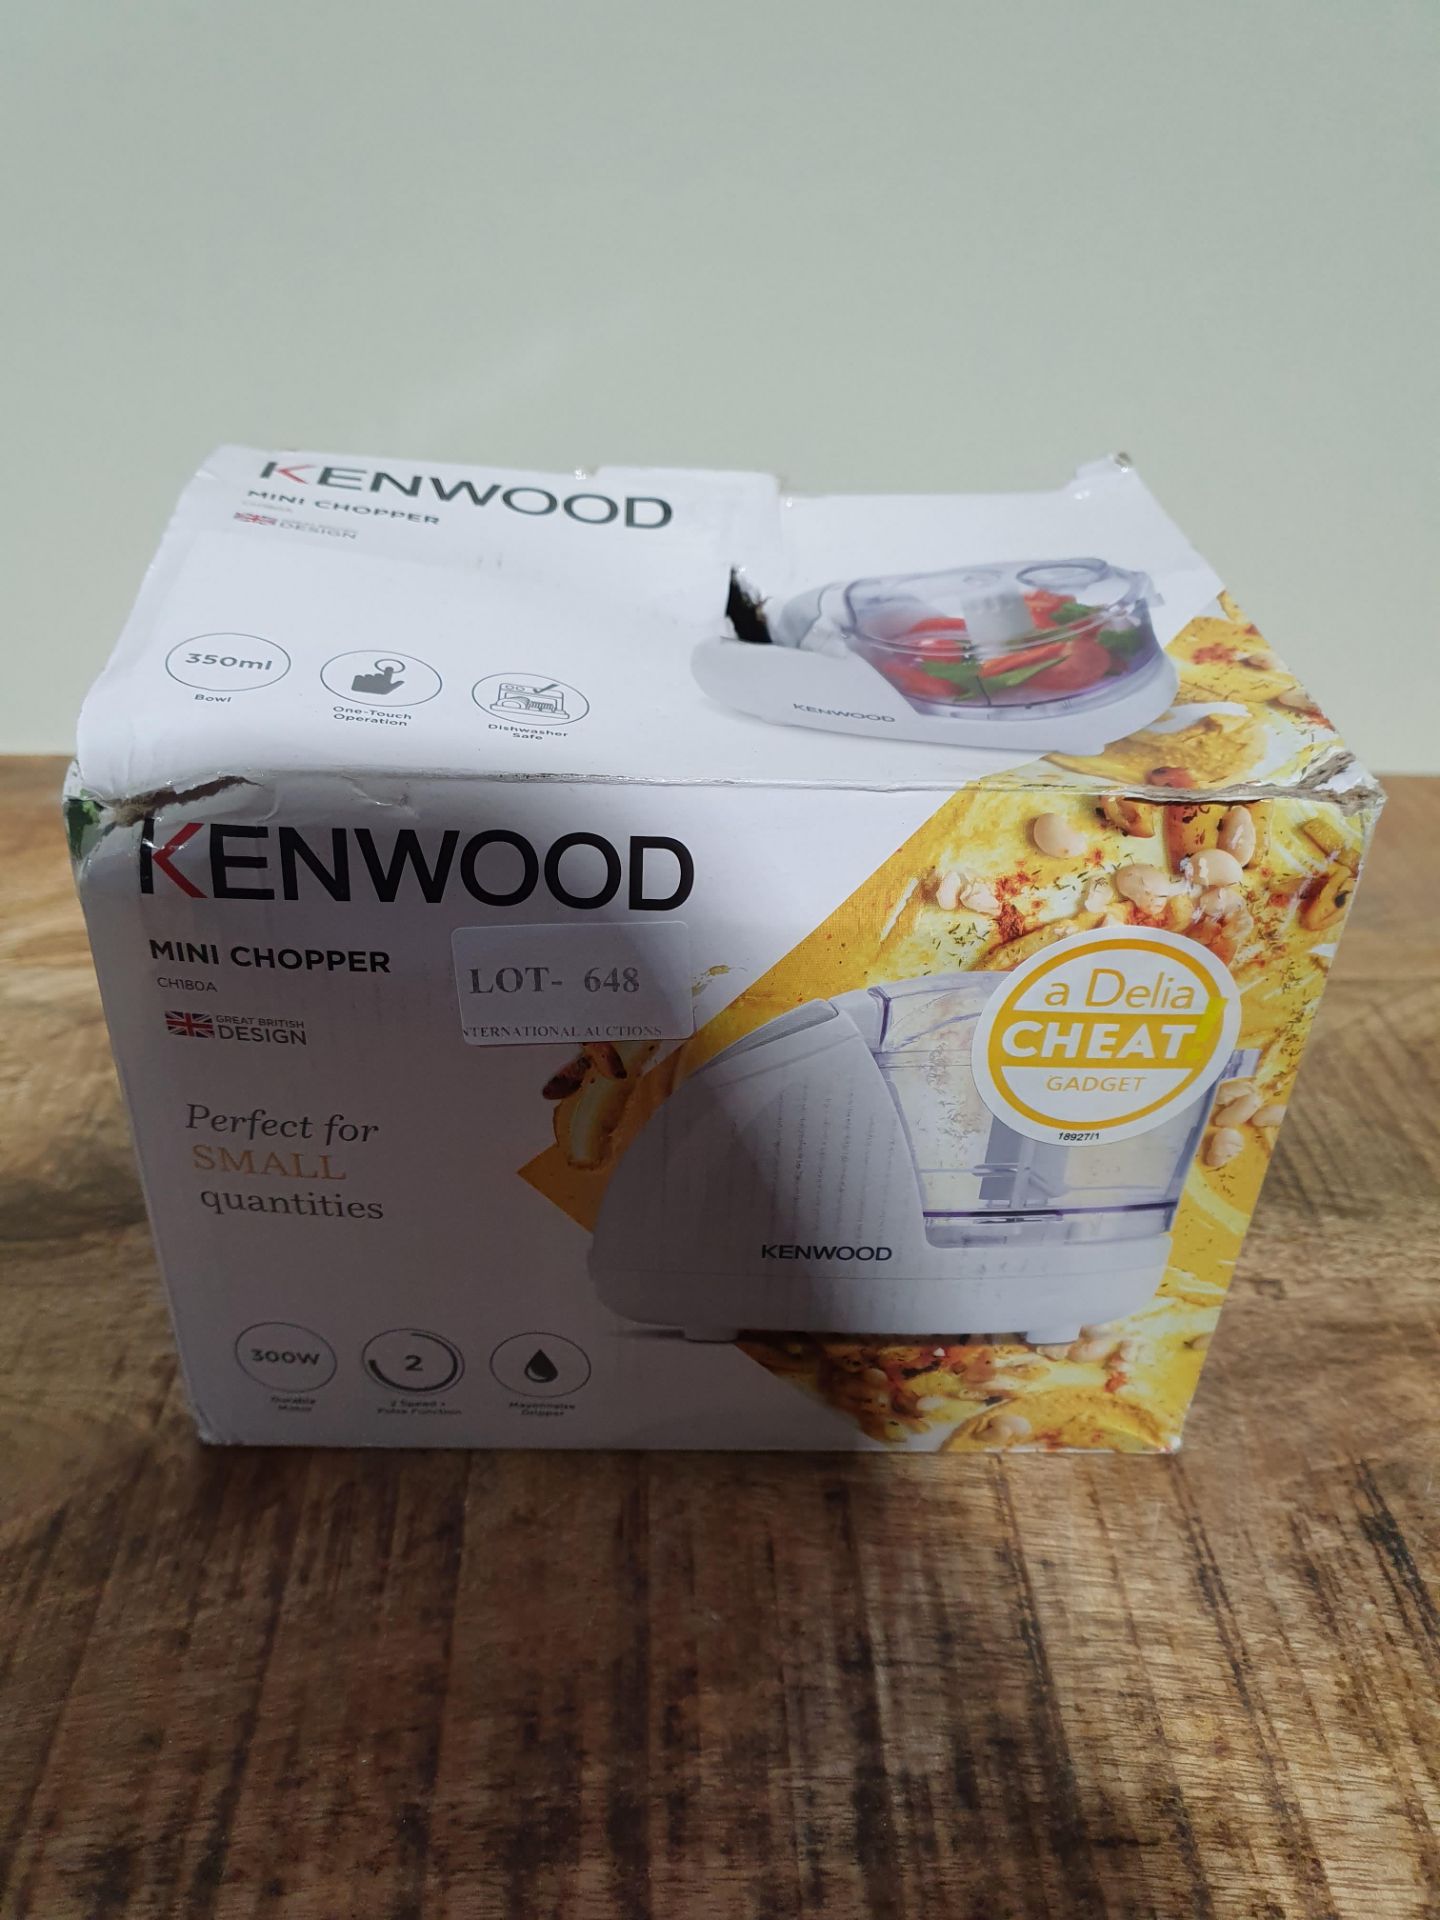 KENWOOD MINI CHOPPER RRP £24.99Condition ReportAppraisal Available on Request - All Items are